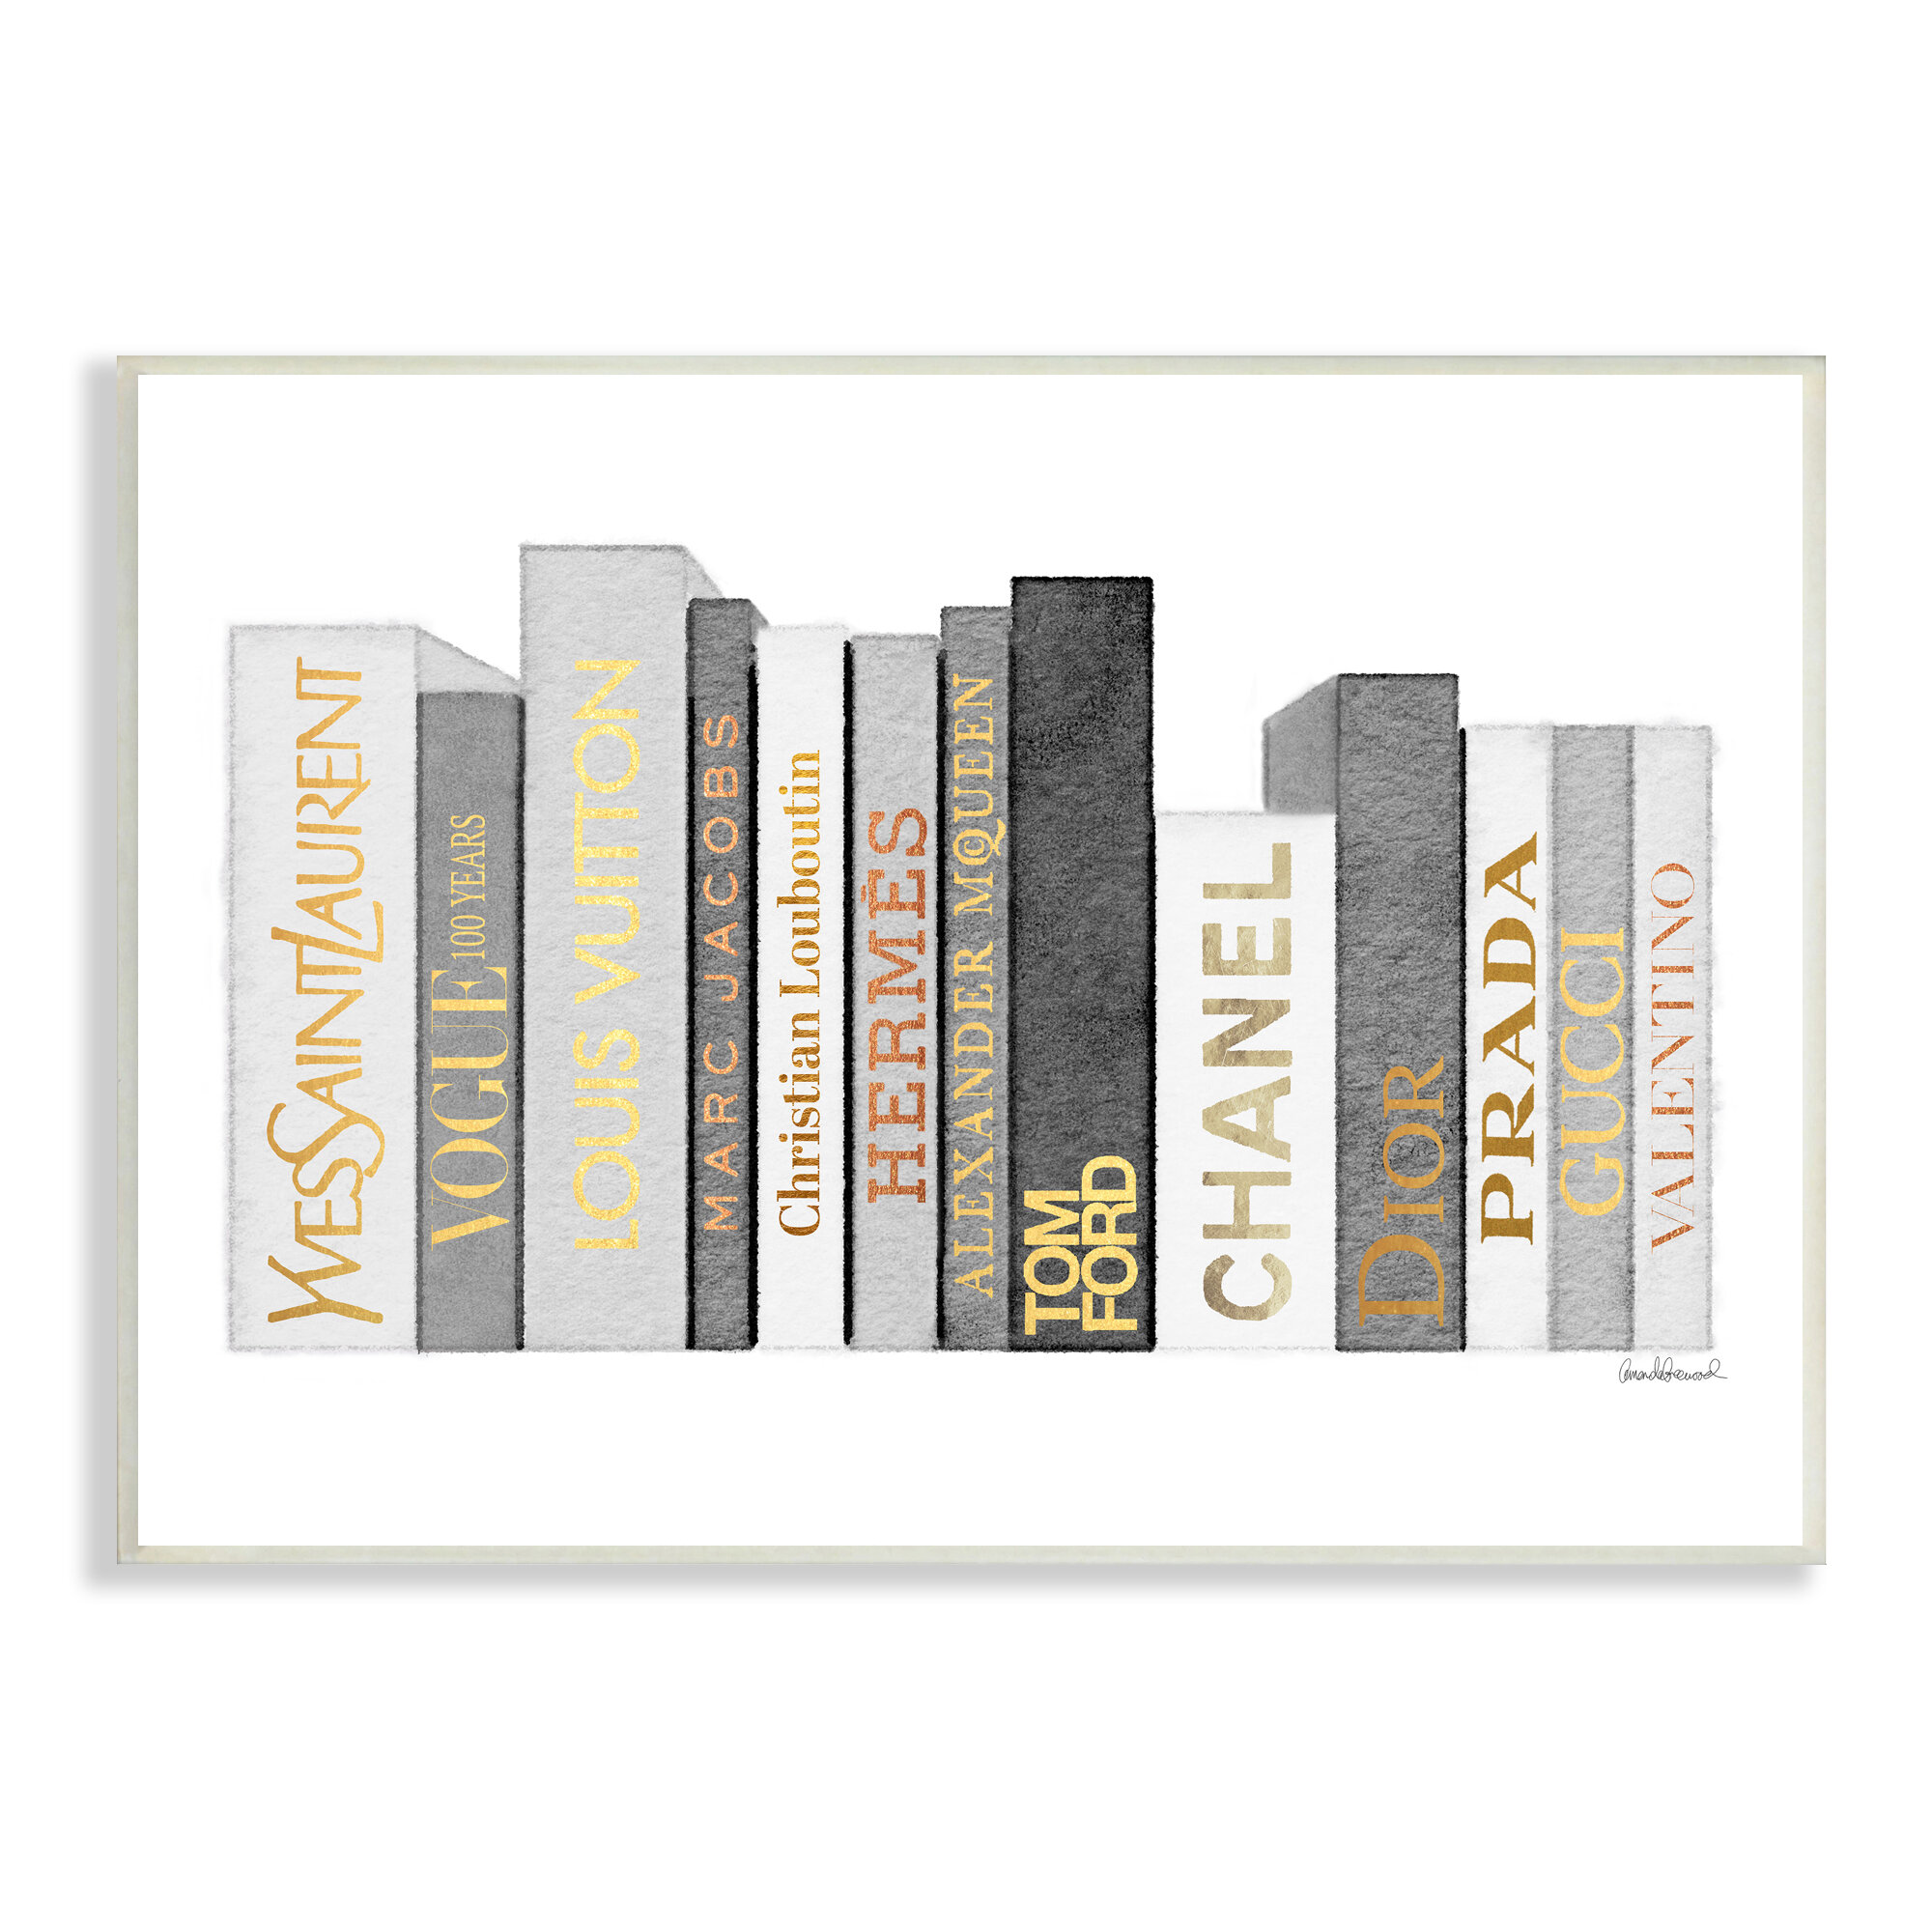 Stupell Industries Fashion Designer Shoes Bookstack Black and White Watercolor Canvas Wall Art by Amanda Greenwood